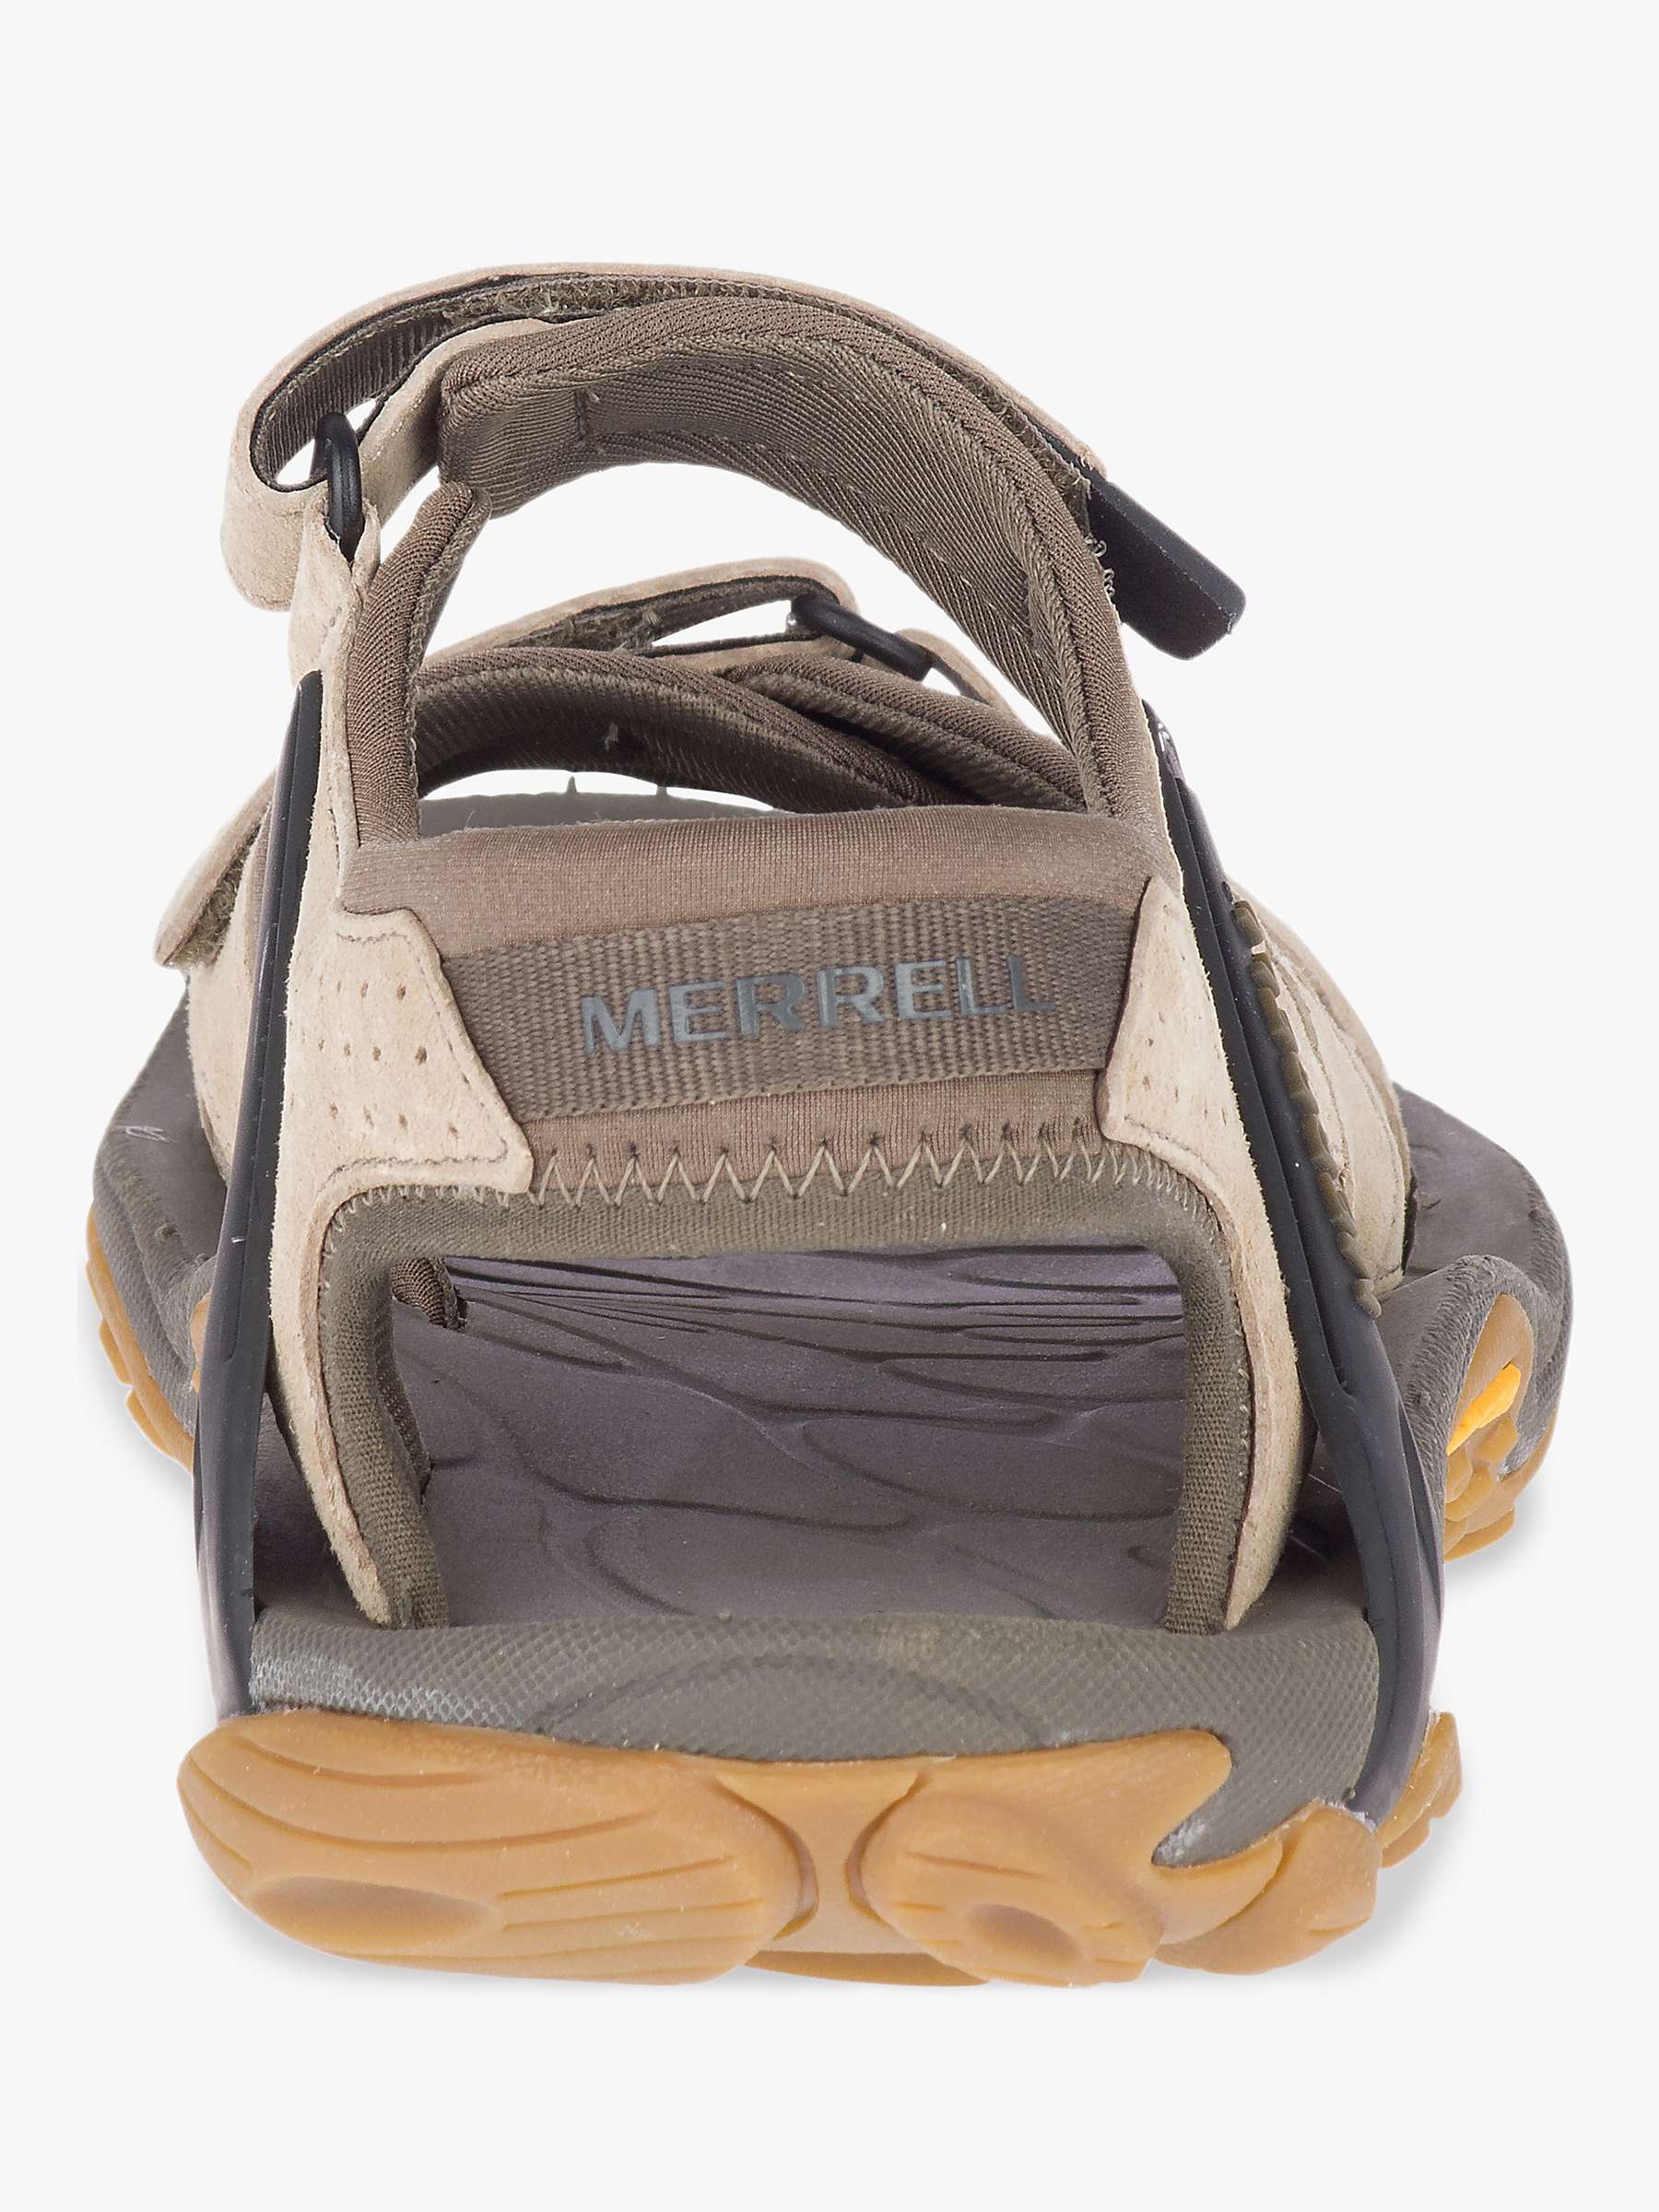 Buy Merrell Kahuna 4 Women's Walking Sandals, Classic Taupe Online at johnlewis.com